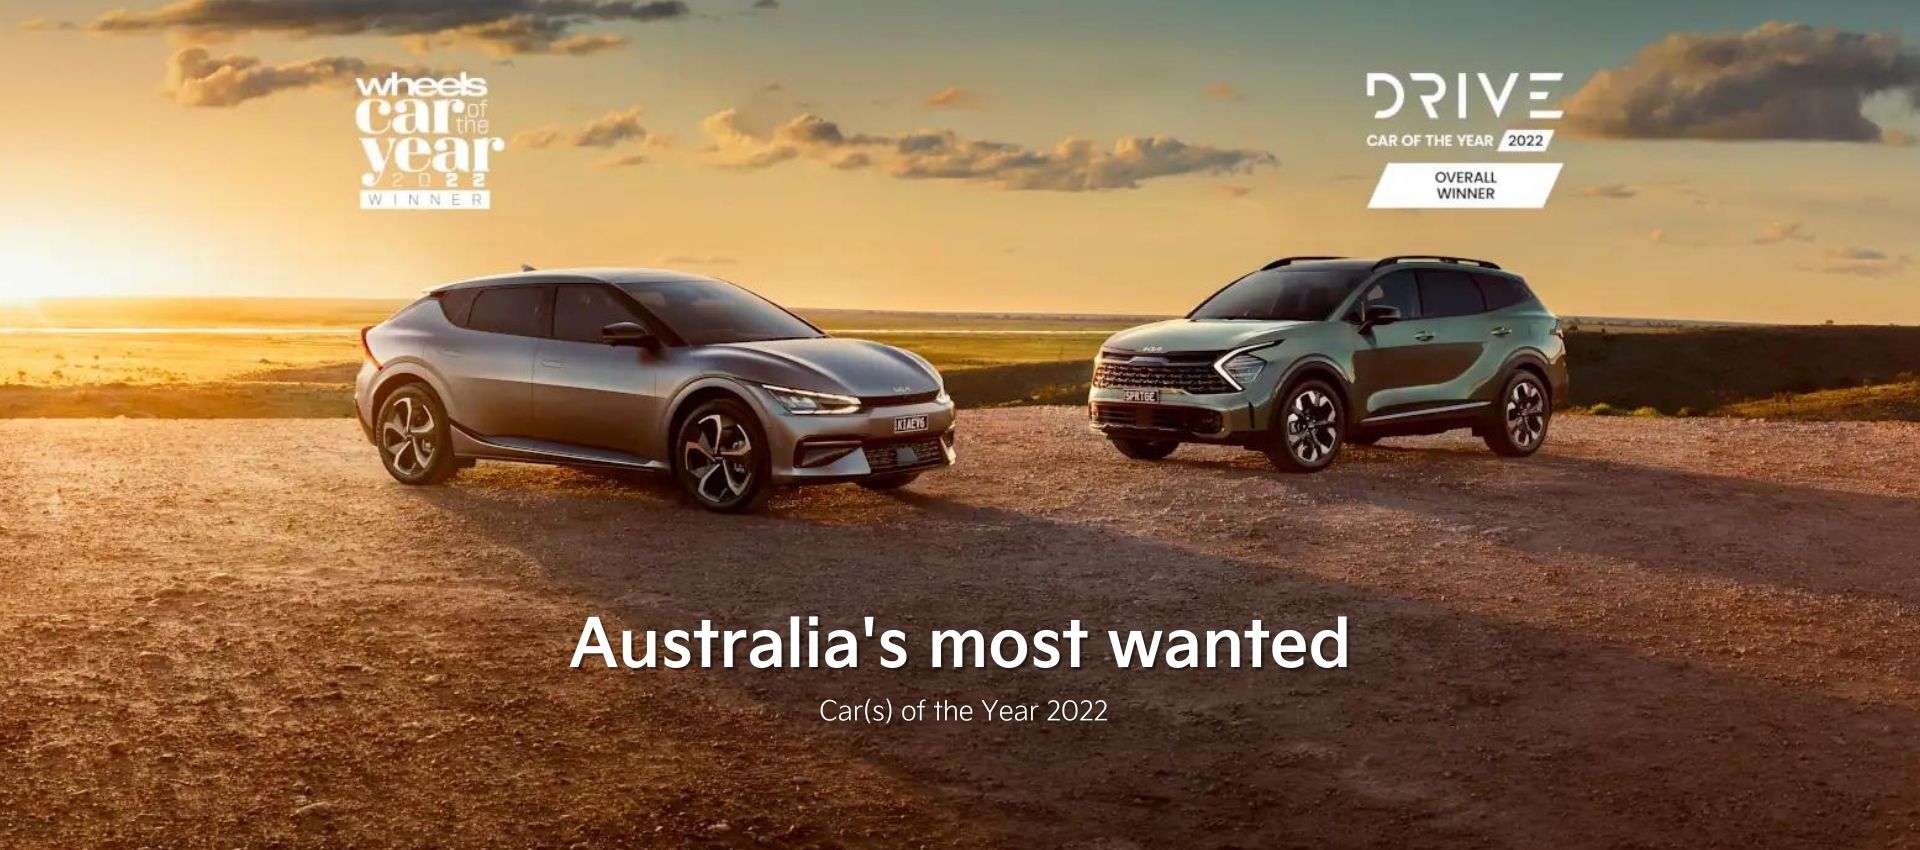 Australia's Most Wanted Car(s) of the Year 2022